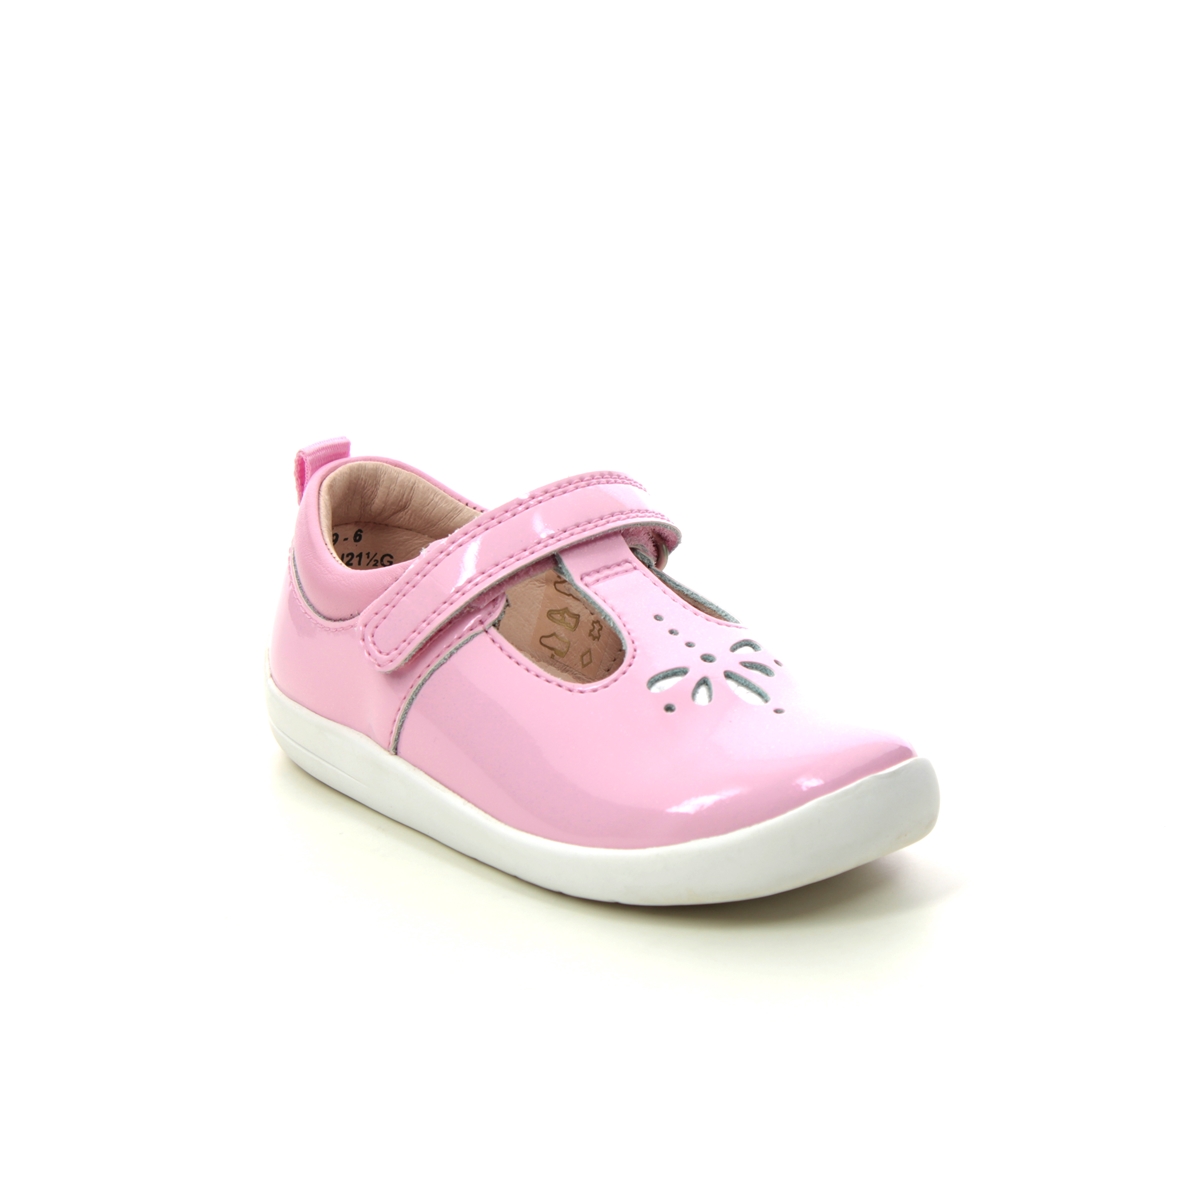 Start Rite - Puzzle In Pink 0779-67G In Size 5.5 In Plain Pink 1St Shoes & Prewalkers  In Pink For kids